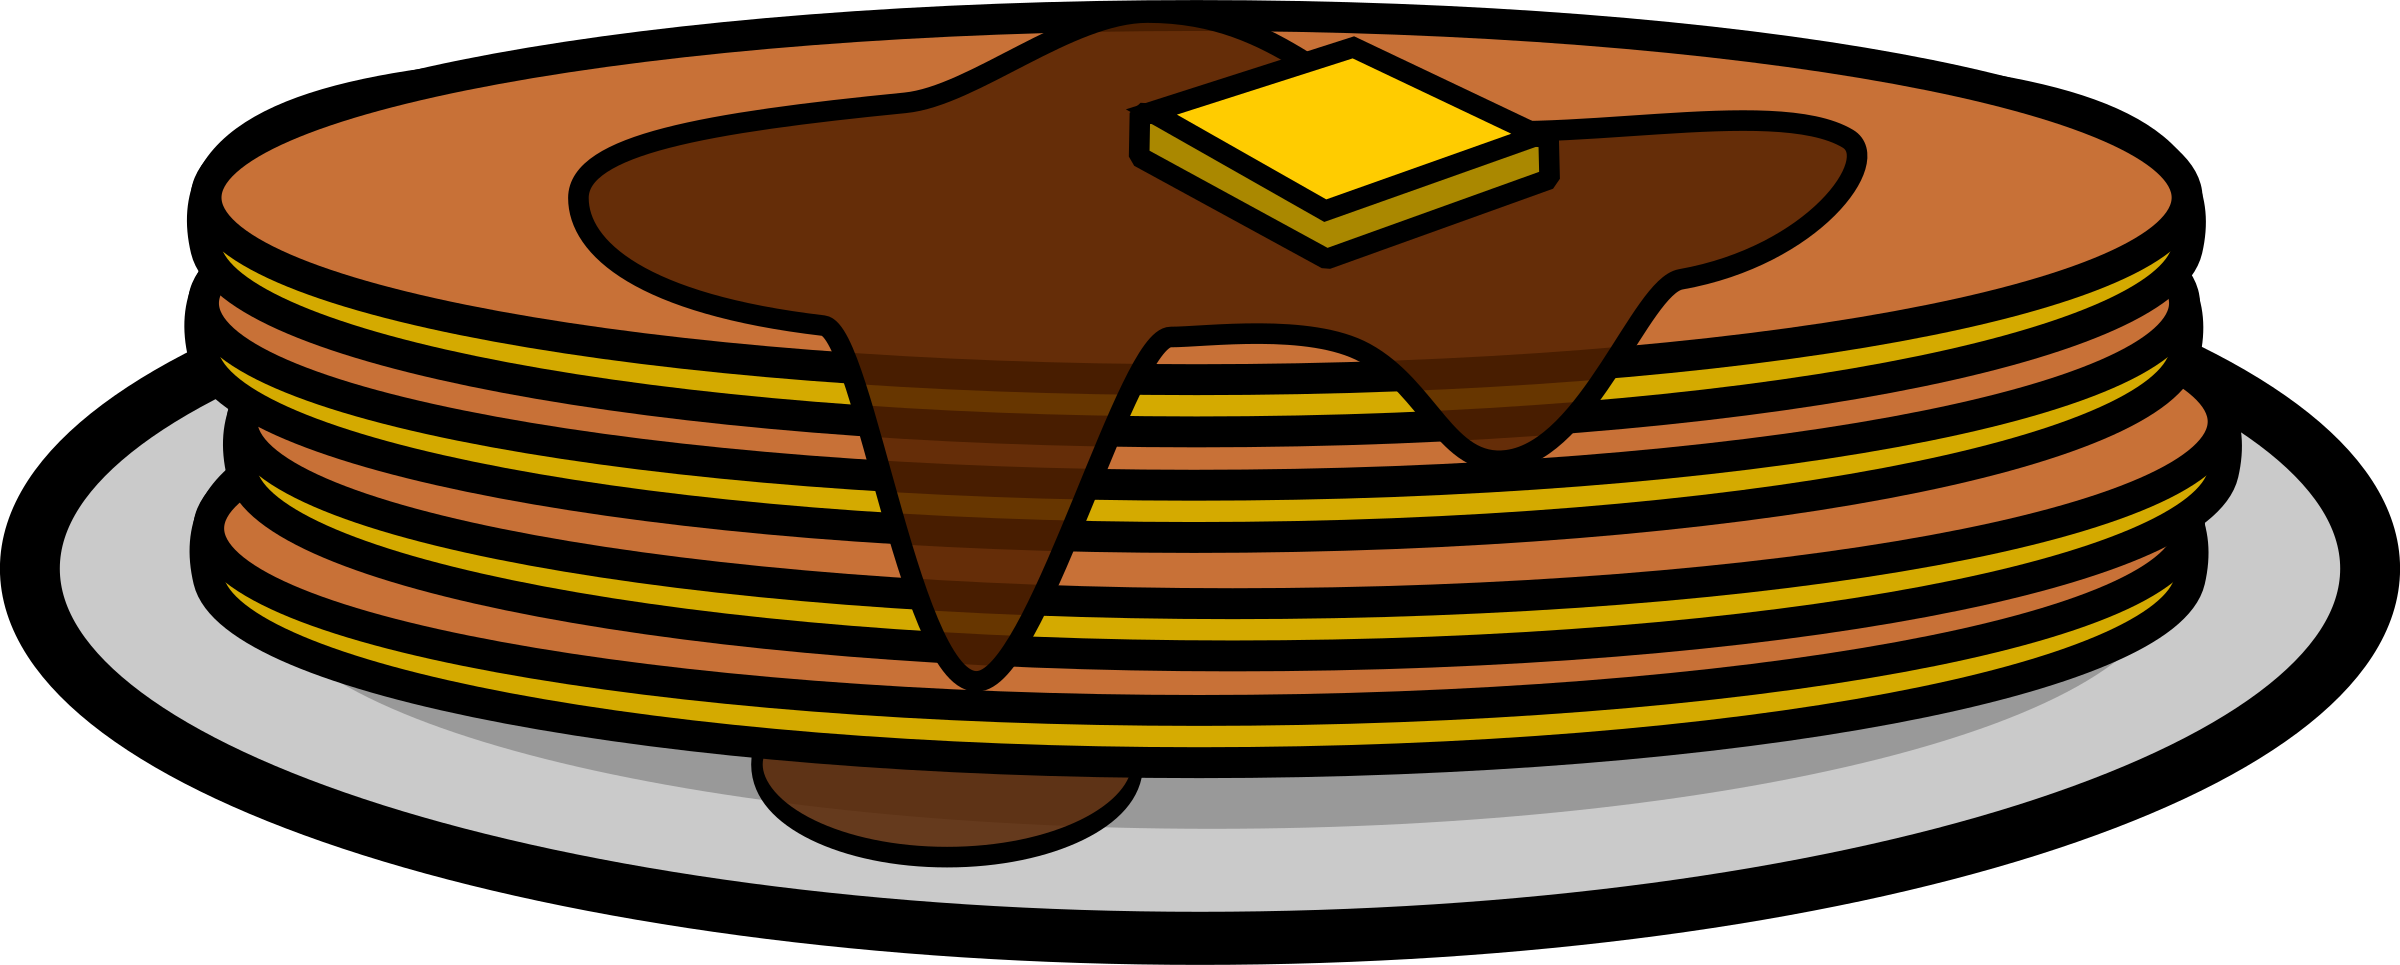 free clipart images pancakes - photo #32